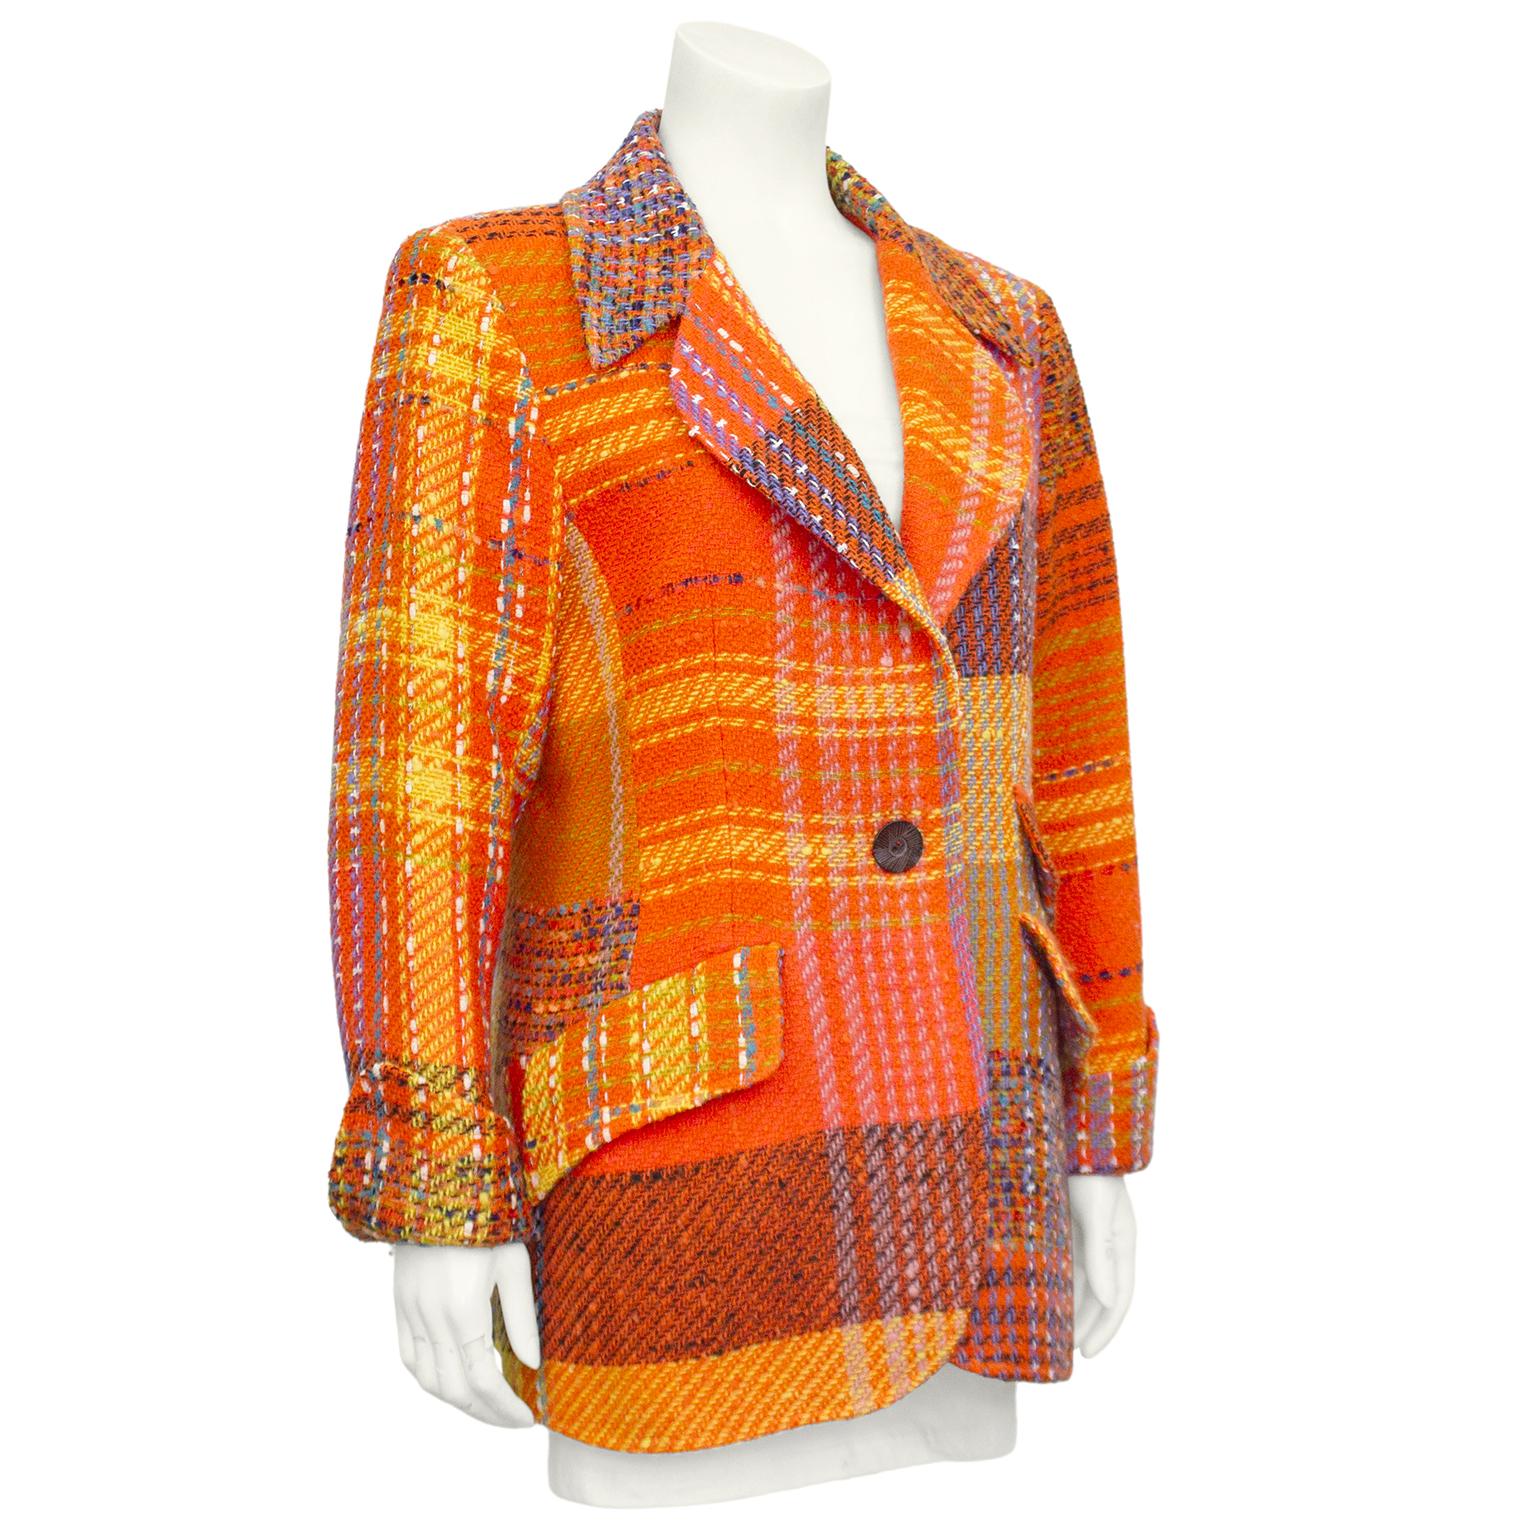 Christian Lacroix equestrian style blazer from the 1990s. Patchwork orange, yellow and purple tweed with a distorted plaid pattern throughout. Notched collar and single carved wood button. Three flap pockets, two on the left and one on the right.